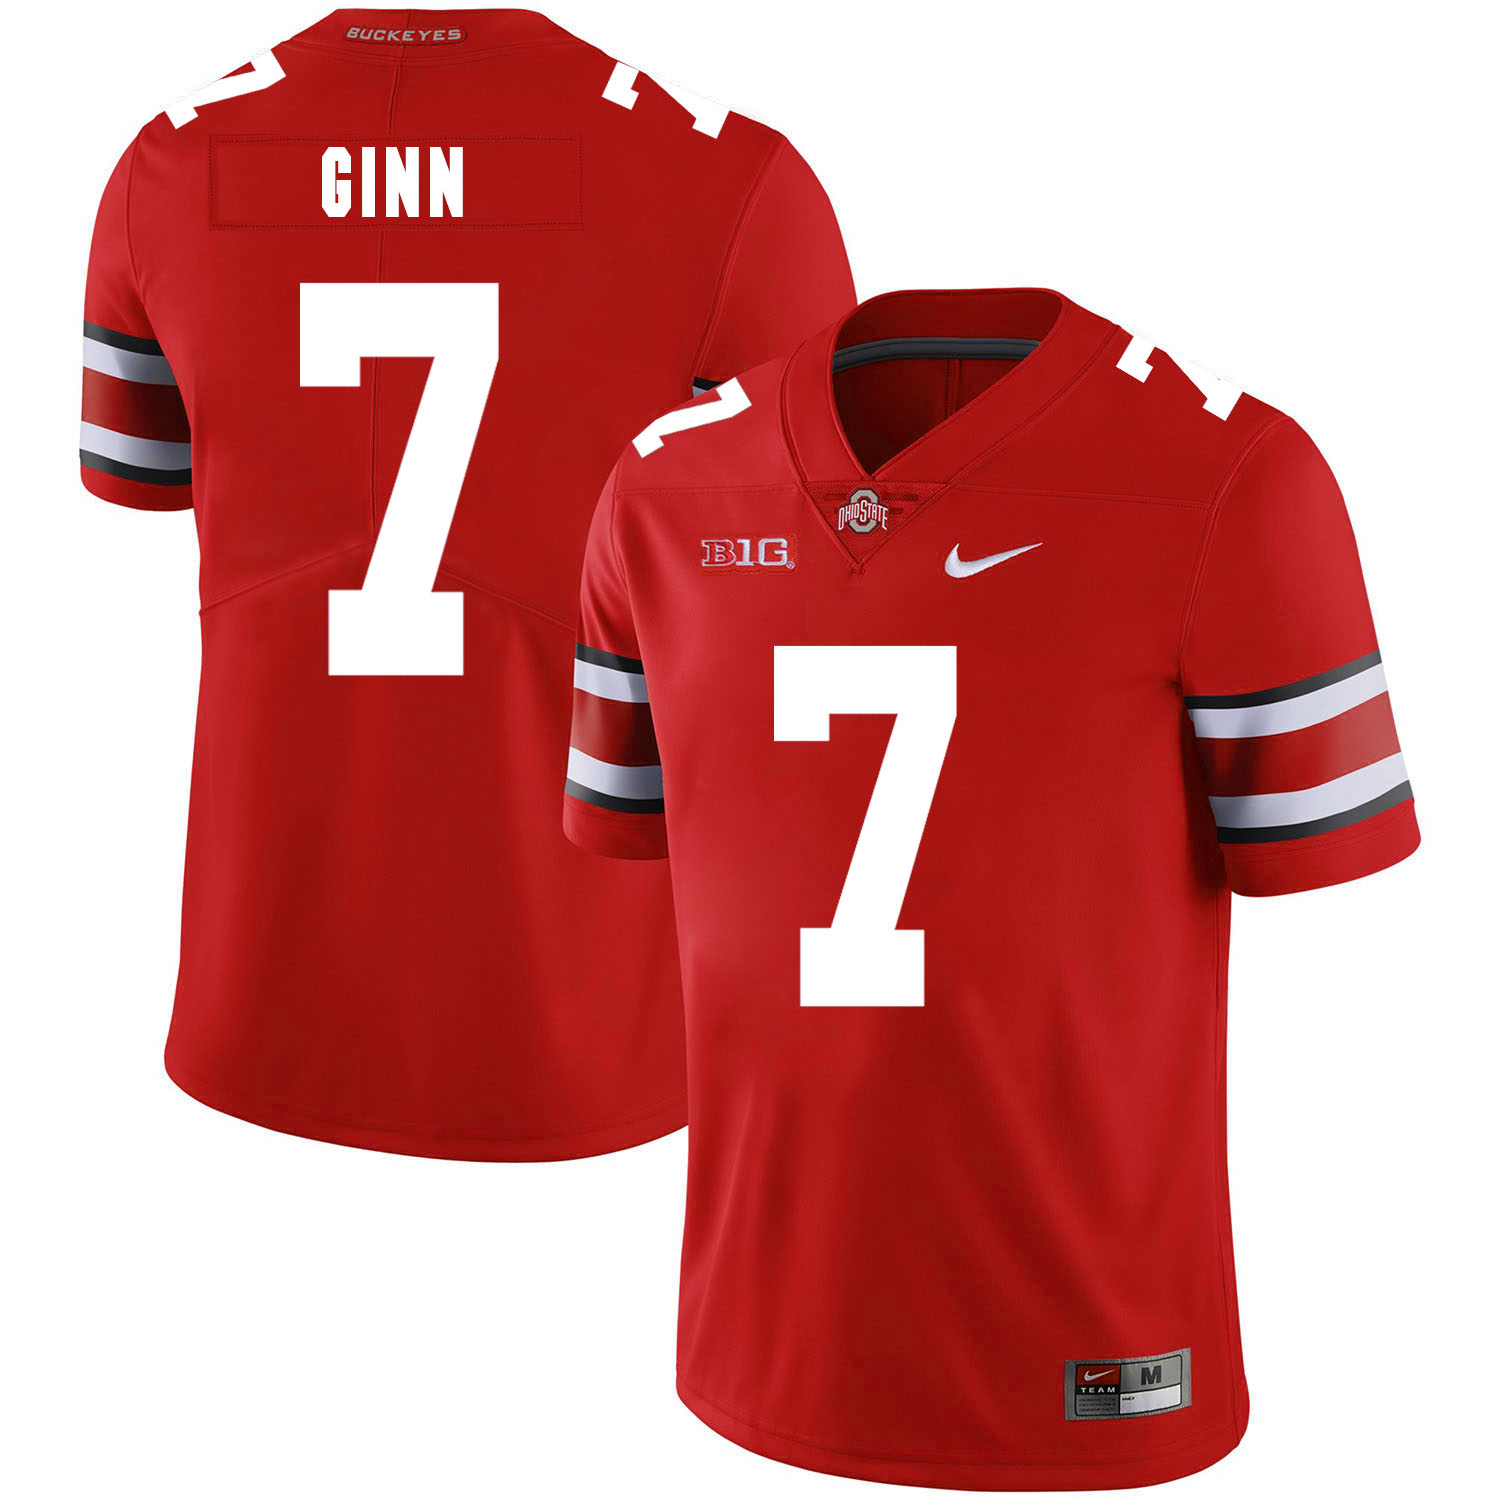 Ohio State Buckeyes 7 Ted Ginn Jr. Red Nike College Football Jersey